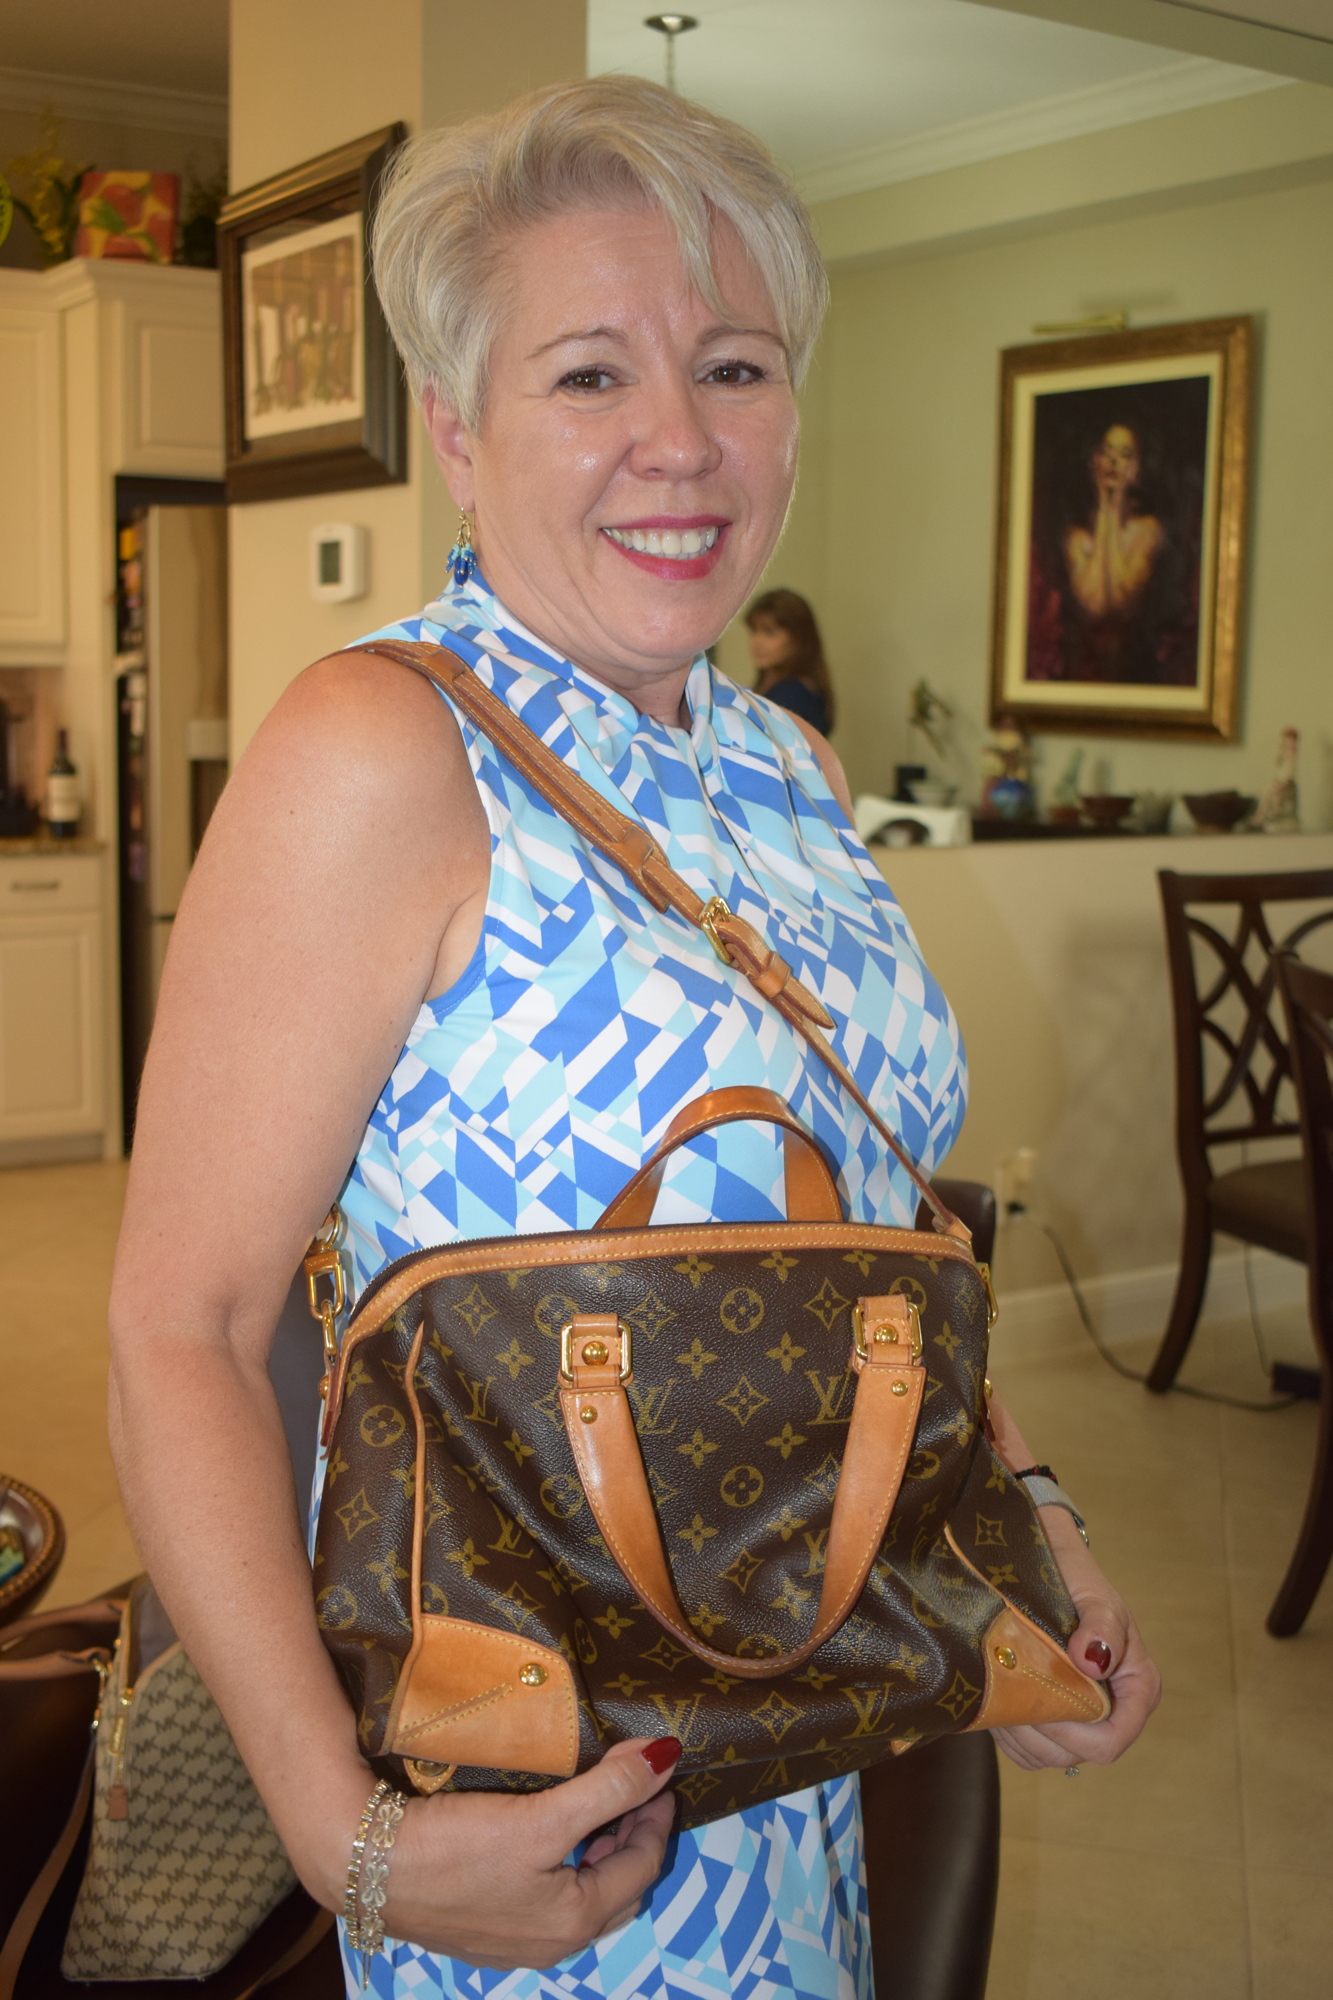 Terri Stern's husband, Ron, gave her this expensive Louis Vuitton bag after she survived her battle against cancer.